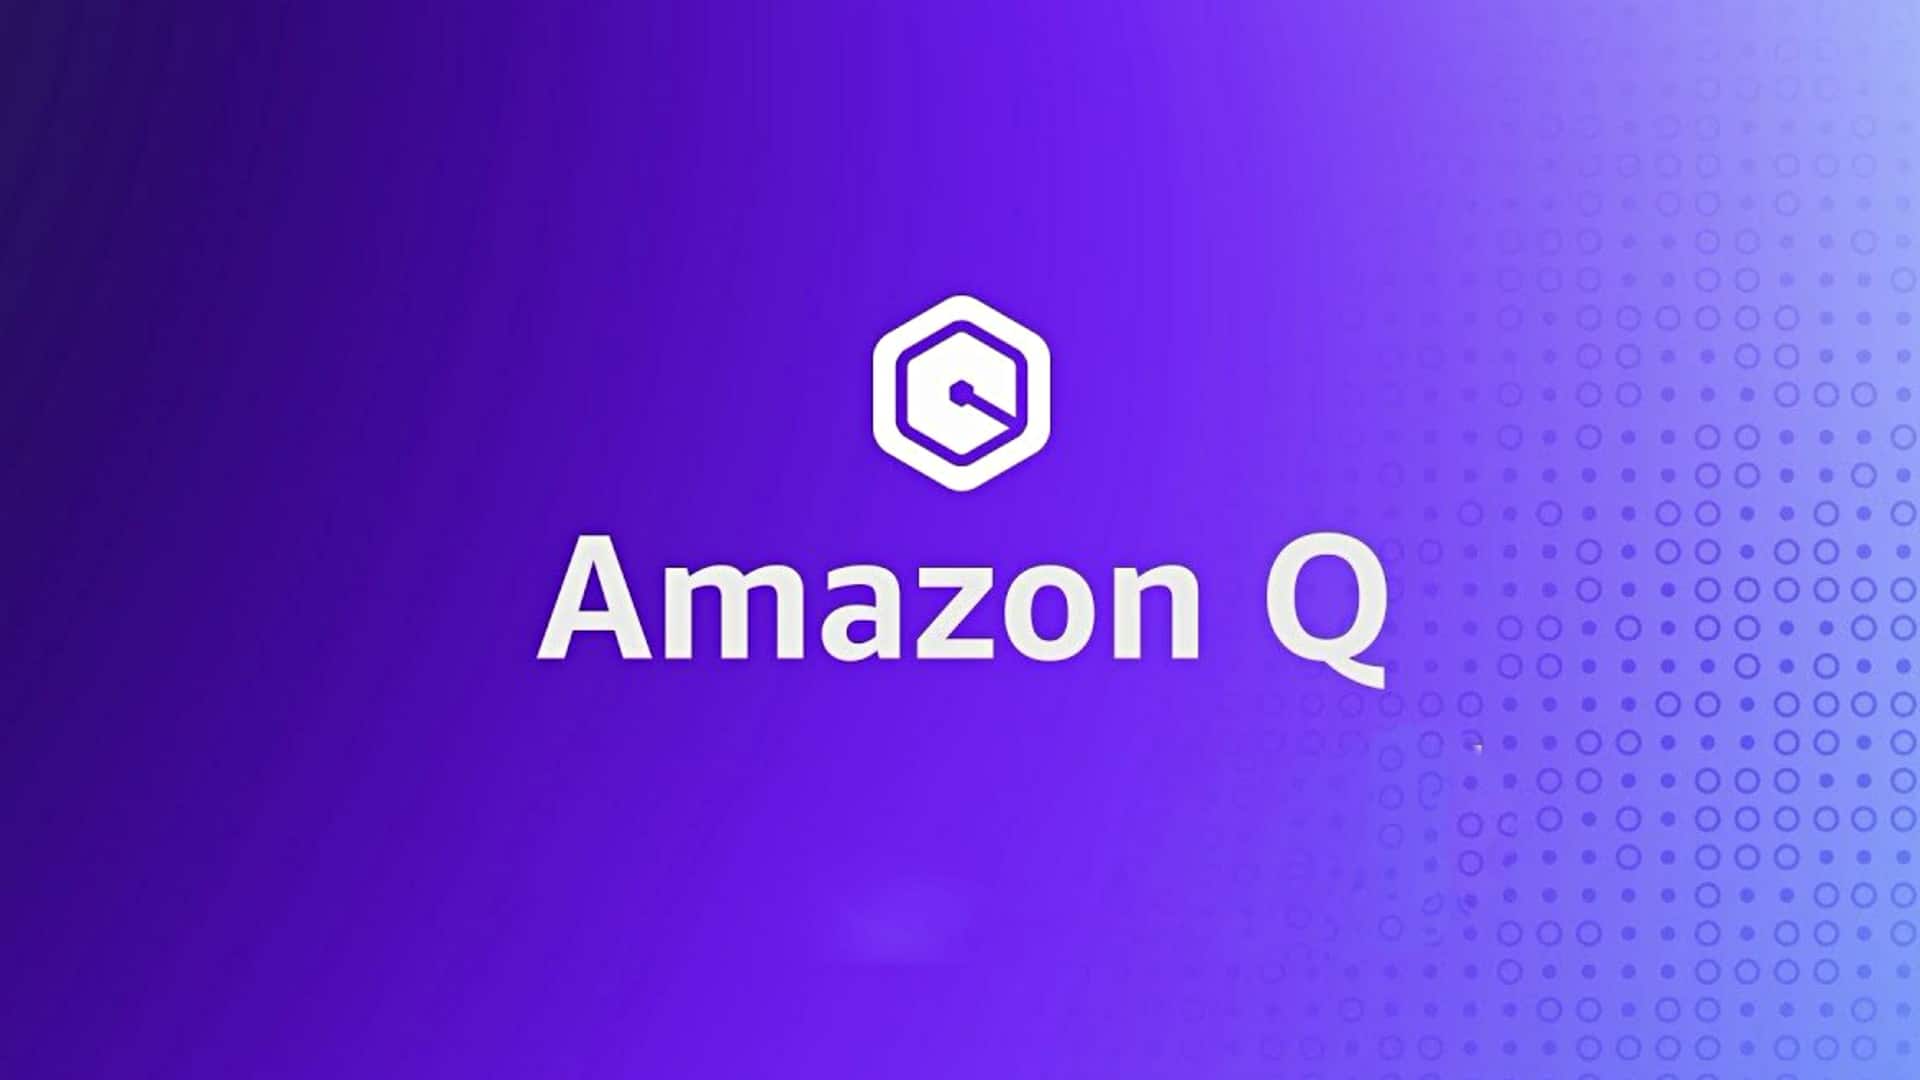 How Amazon's Q fares against OpenAI's ChatGPT and Anthropic's Claude